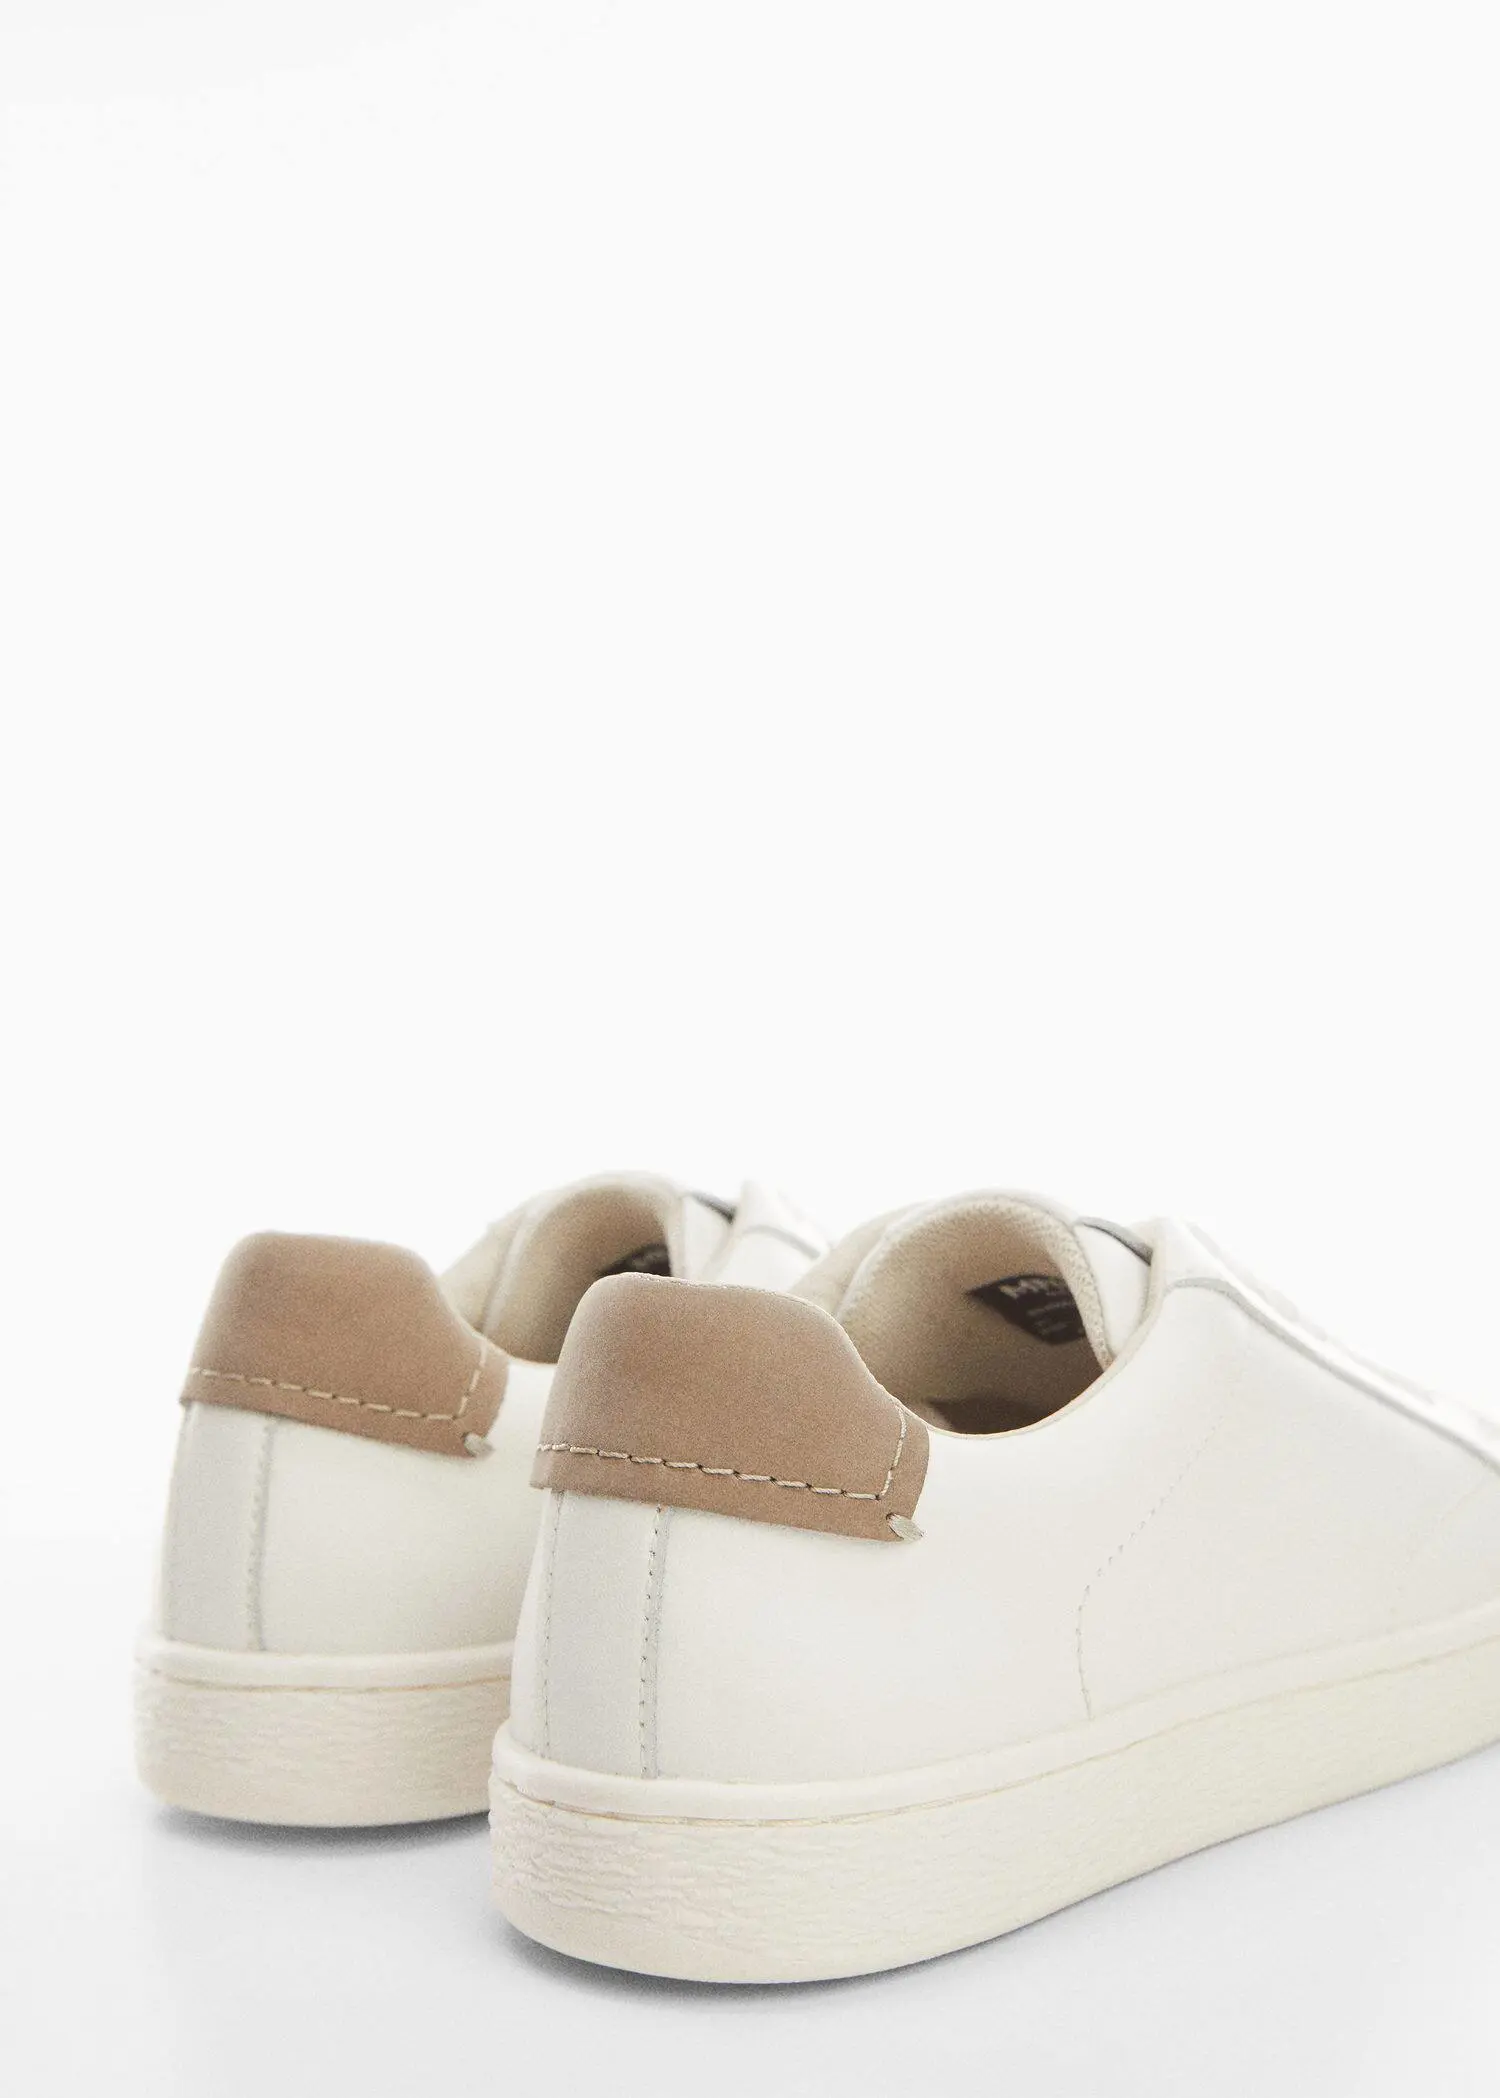 Mango Contrasting panel leather sneakers. 3